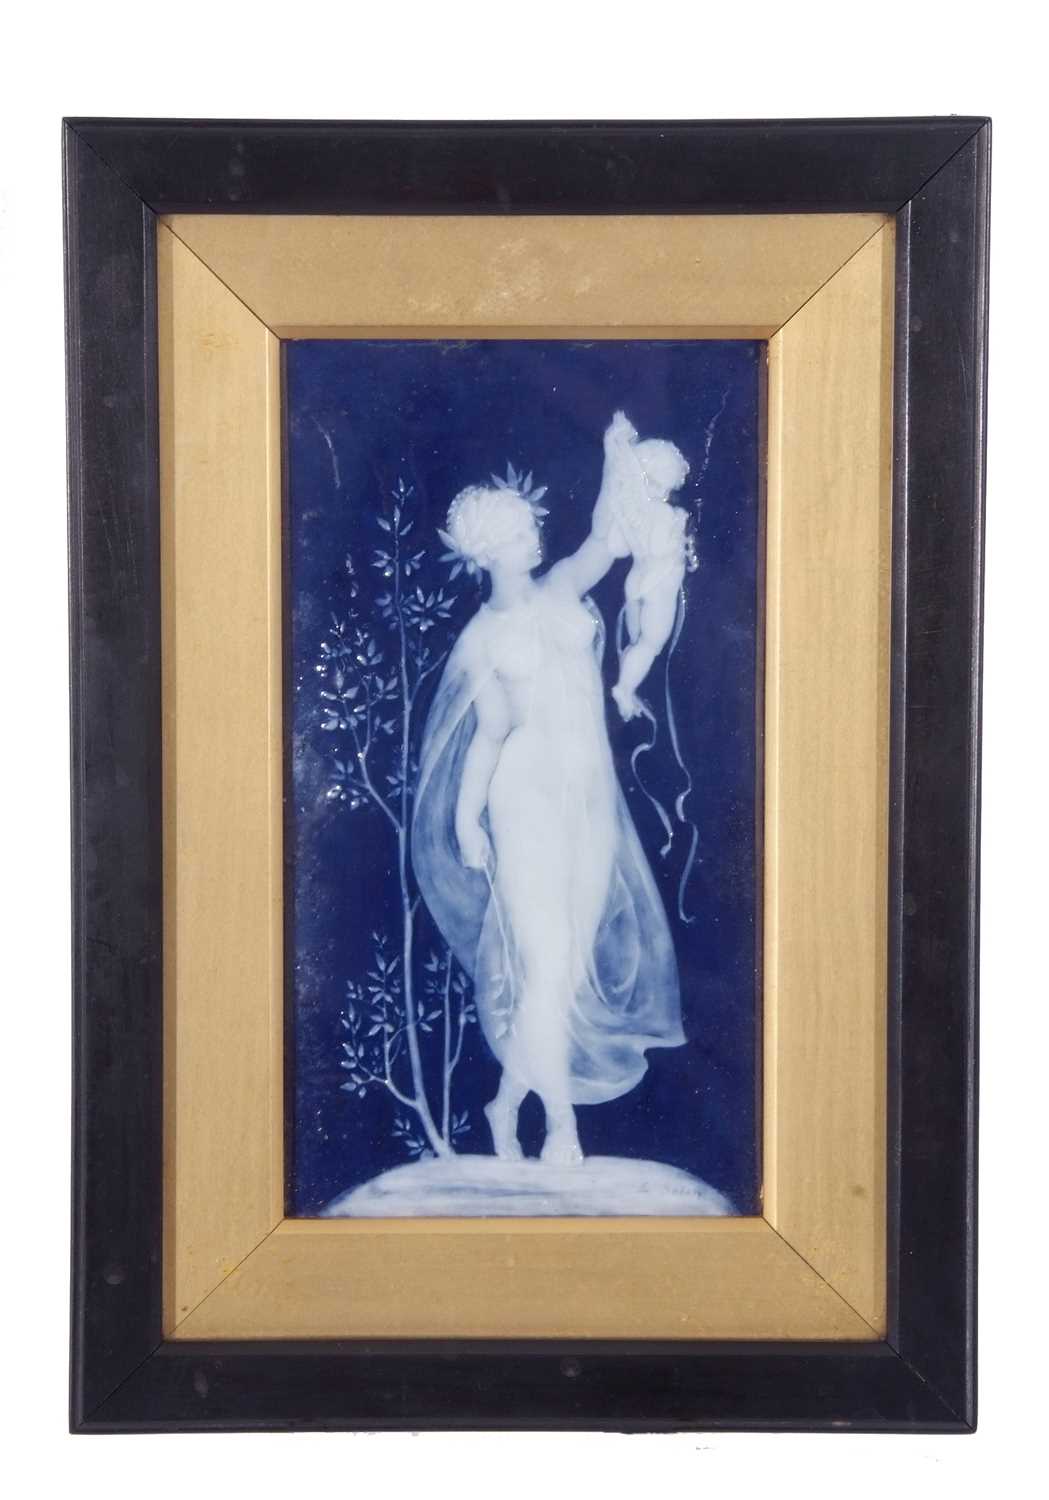 Framed pate-sur-pate plaque, signed by L Solon, of a maiden holding a cherub aloft, in black and - Image 2 of 5